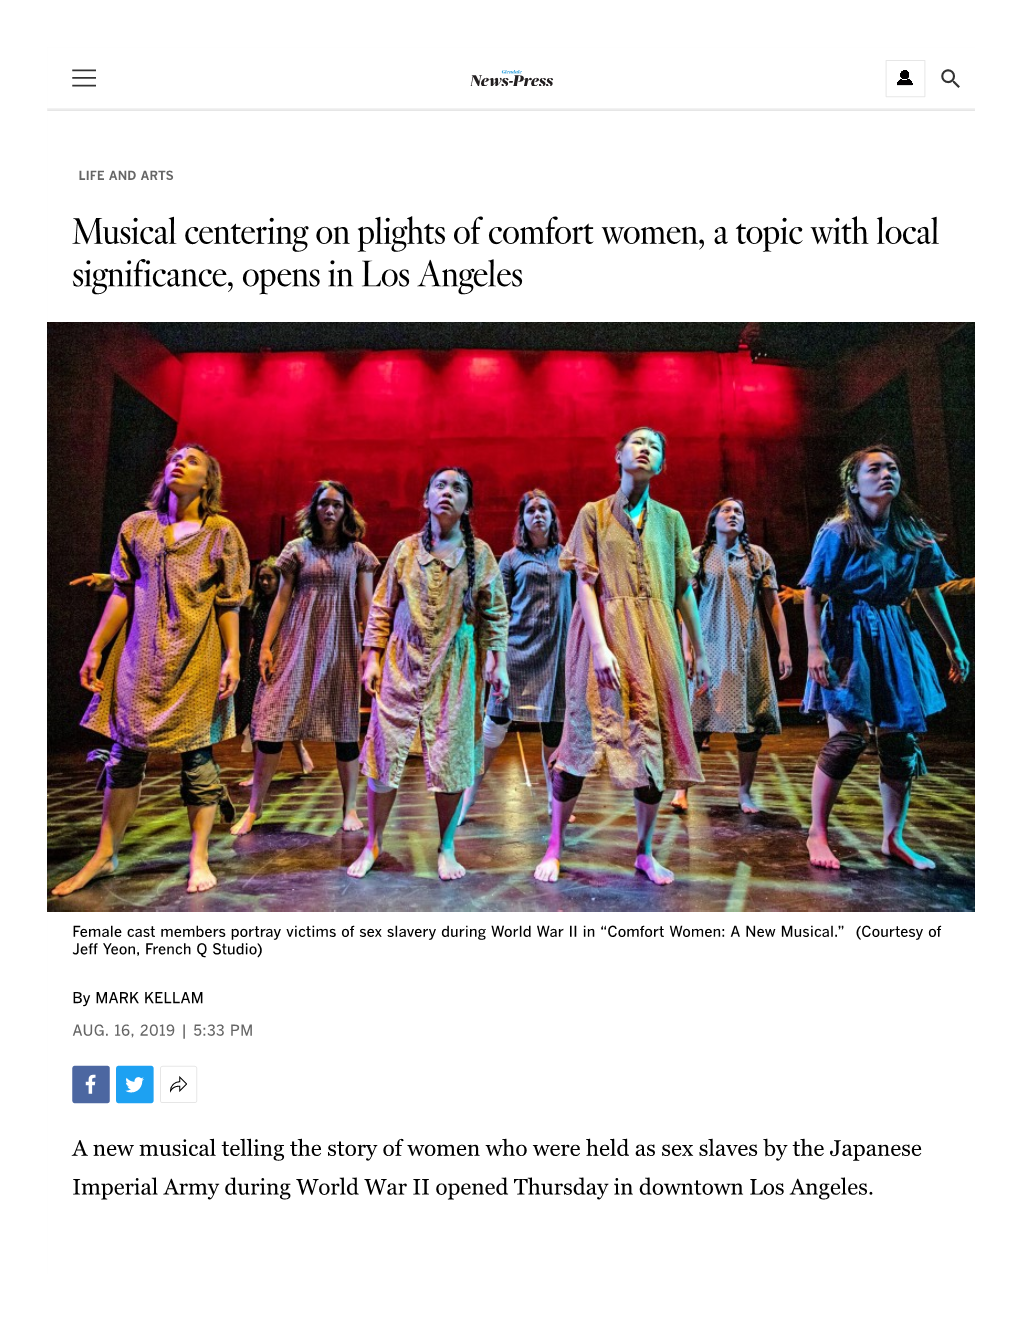 Musical Centering on Plights of Comfort Women, a Topic with Local Significance, Opens in Los Angeles